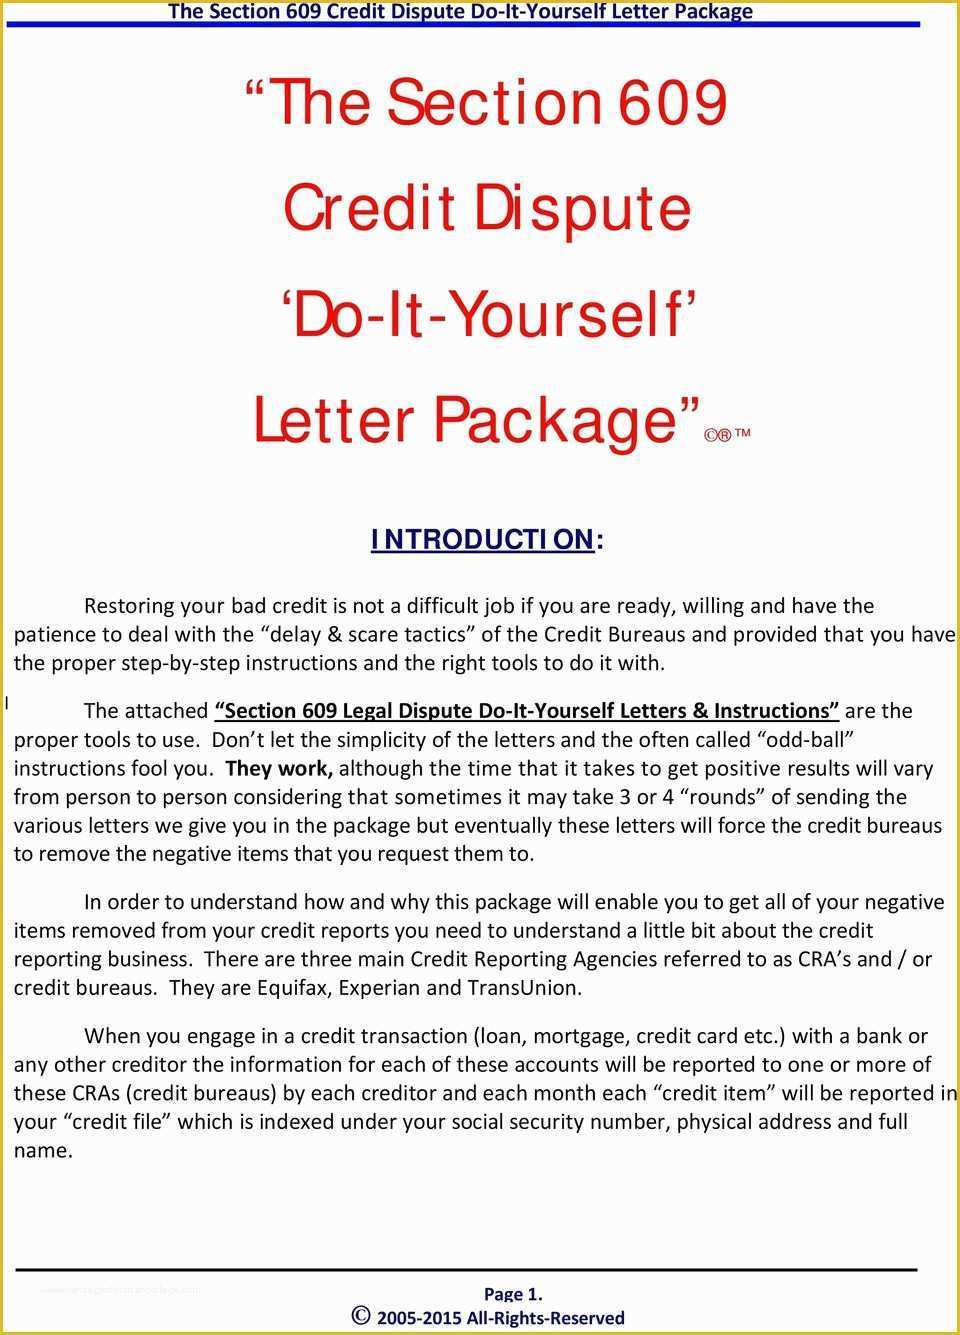 Free 609 Credit Dispute Letter Templates Of the Section 609 Credit Dispute Do It Yourself Letter